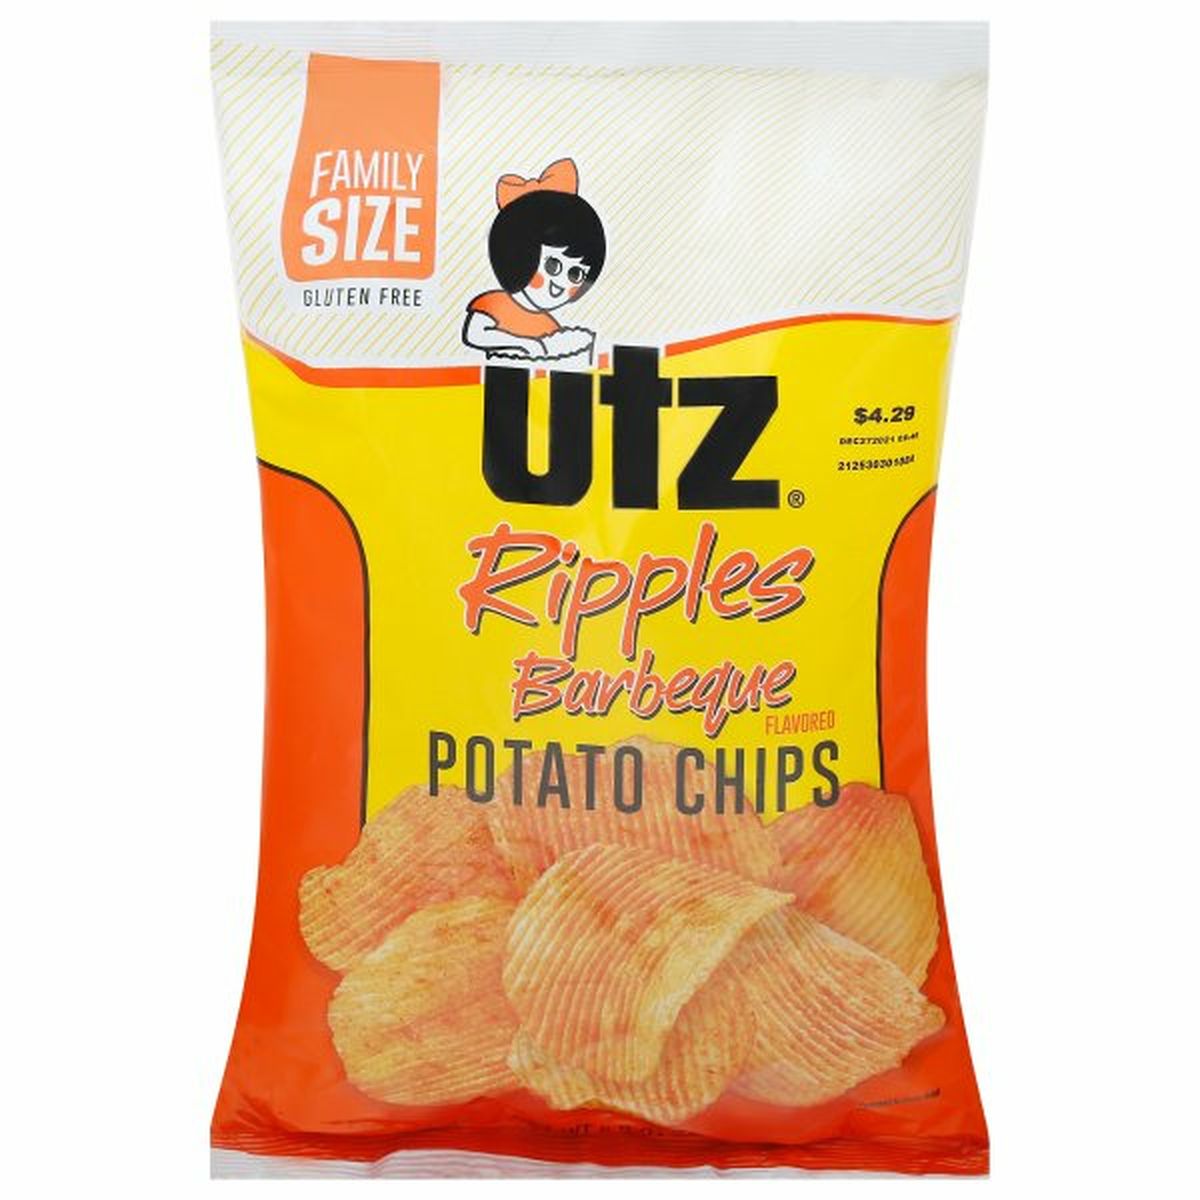 Calories in Utz Potato Chips, Ripples Barbeque Flavored, Family Size